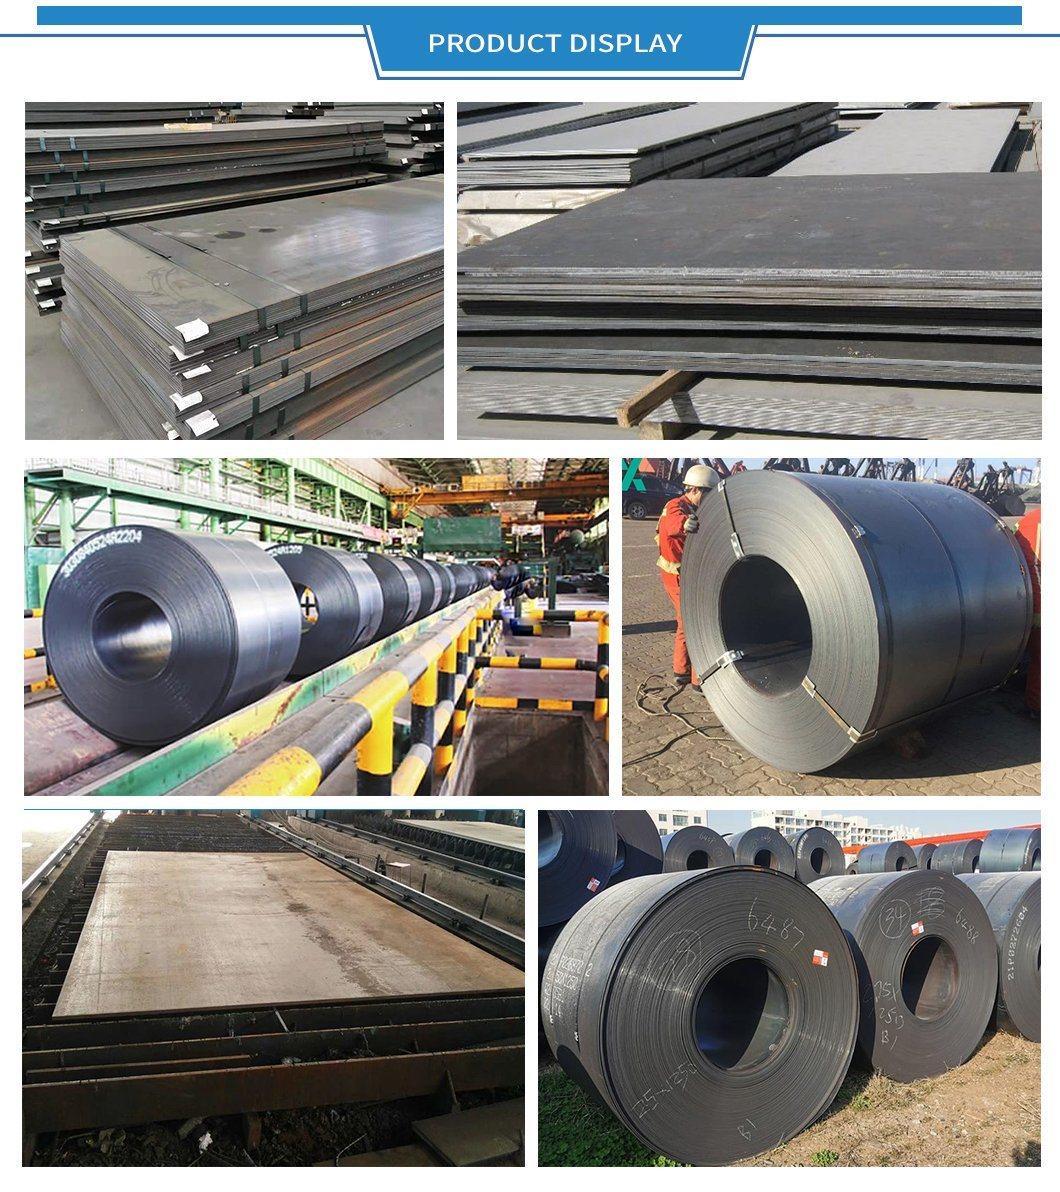 China Supplier High Strength Plate 1 Inch Thickness Q195c Q195D Q195e Hot Rolled Mild Carbon Steel Plate